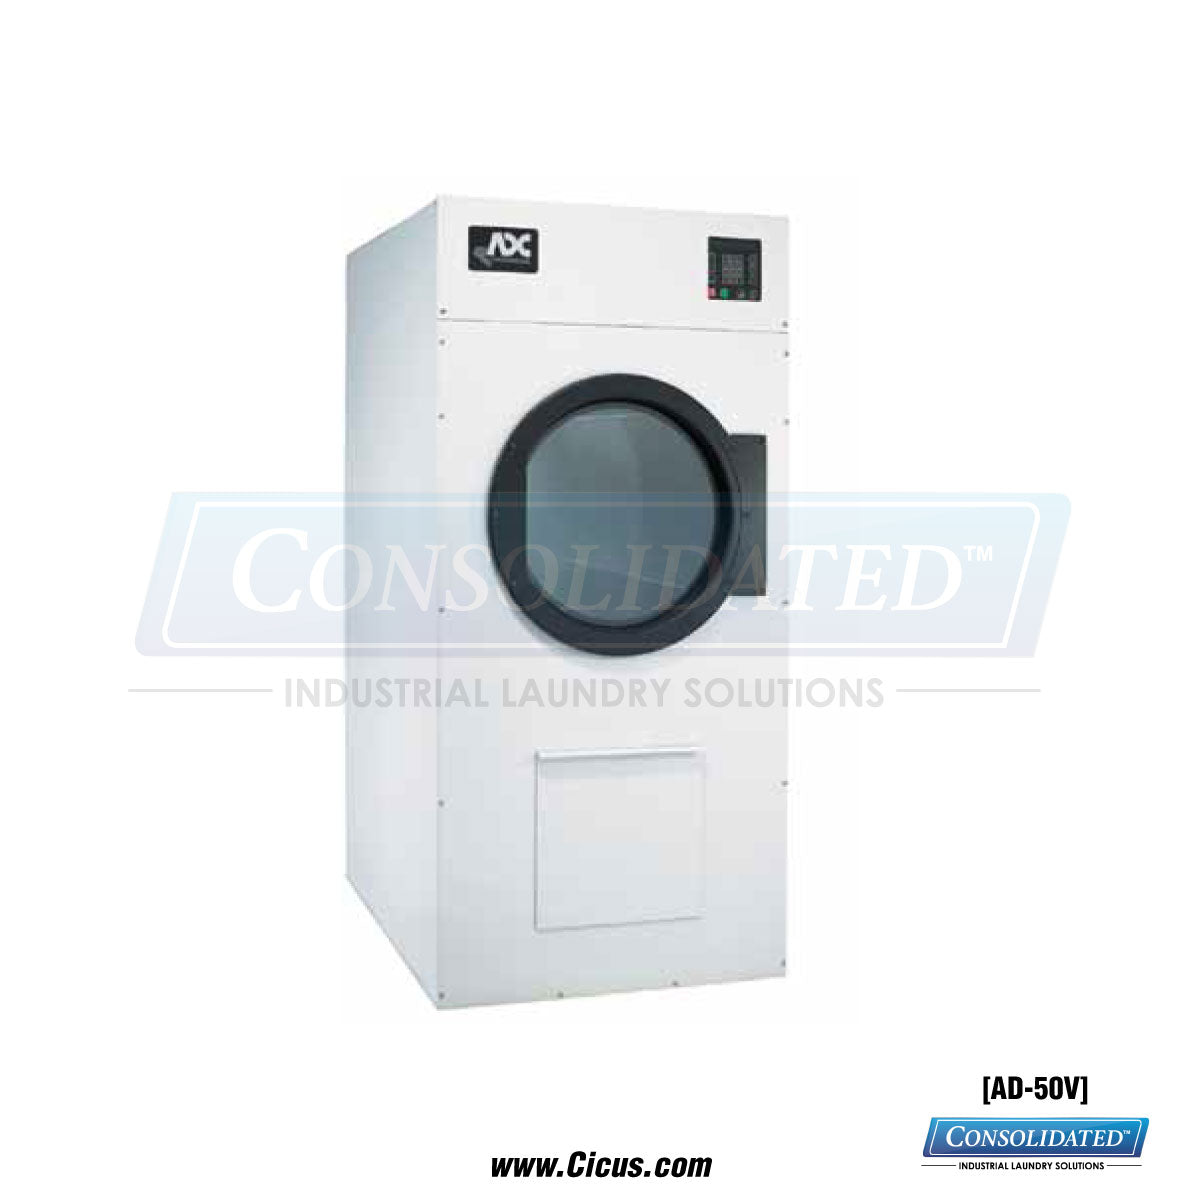 ADC 50-lb Capacity OPL Dryer [AD-50V] - Front View